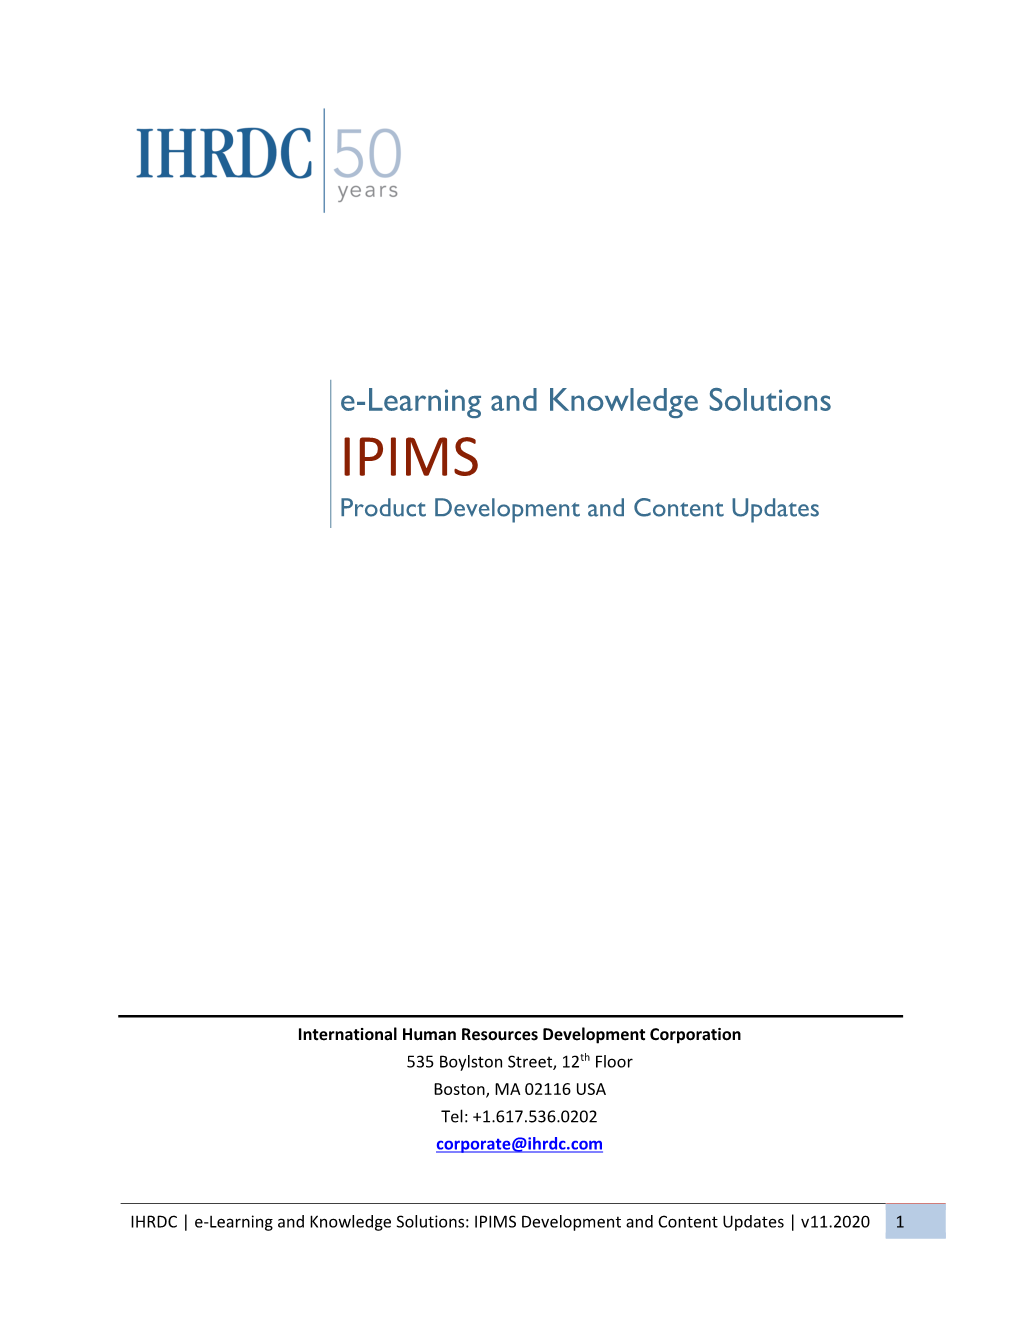 E-Learning and Knowledge Solutions IPIMS Product Development and Content Updates